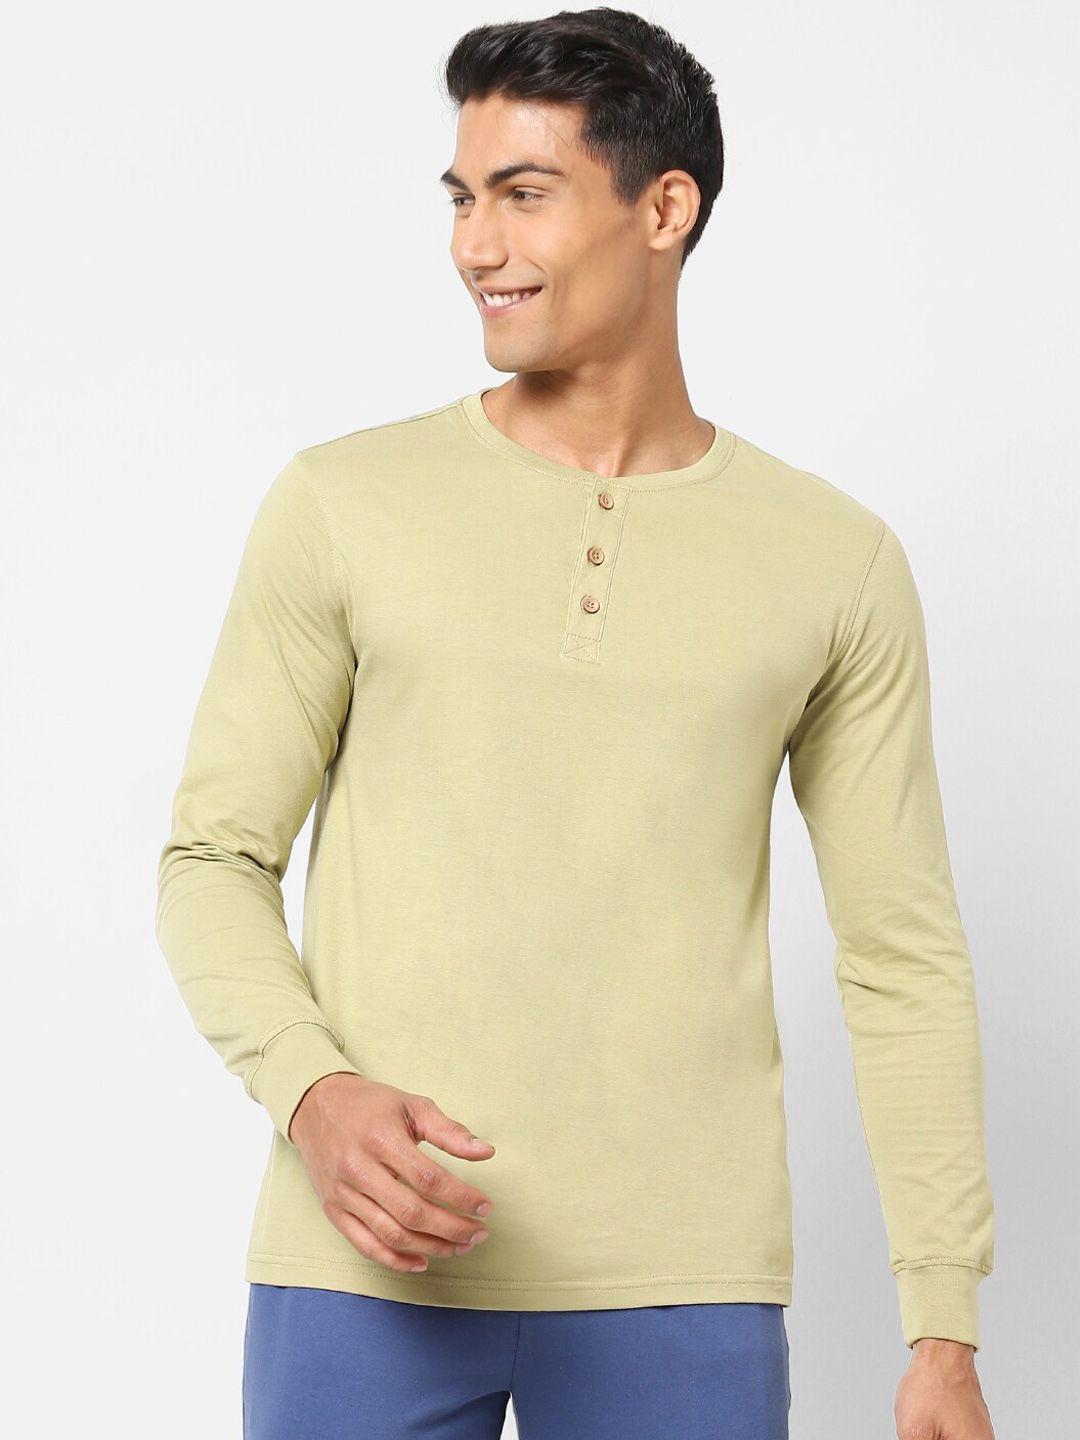 ajile-by-pantaloons-men-green-solid-cotton-lounge-tshirts